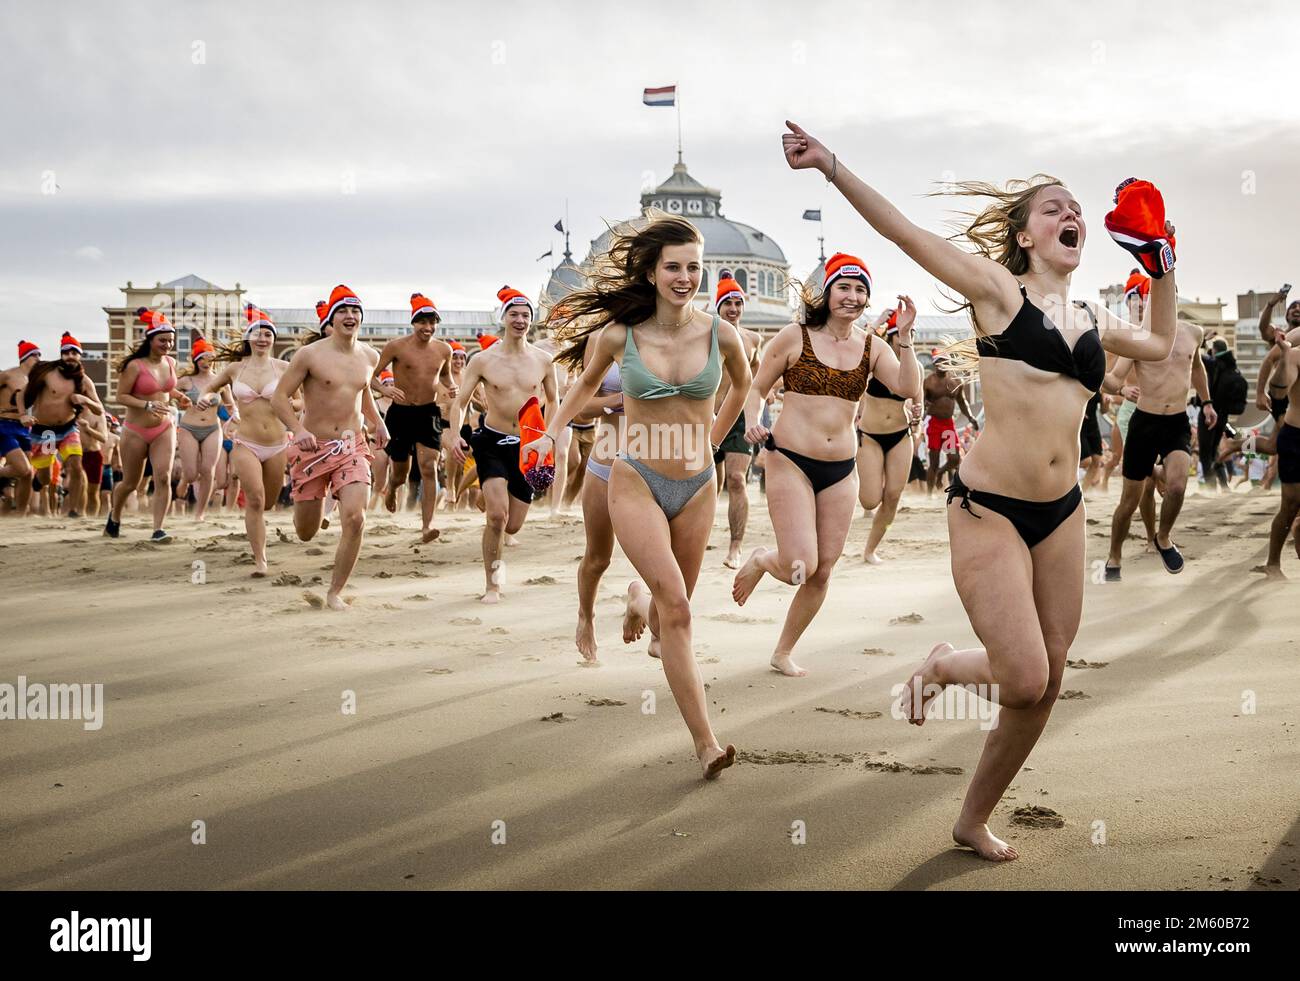 SCHEVENINGEN - People run into the sea at the beach of Scheveningen on New Year's Day. The traditional New Year's dive can continue again after two previous canceled editions due to the corona crisis. ANP REMKO DE WAAL netherlands out - belgium out Stock Photo